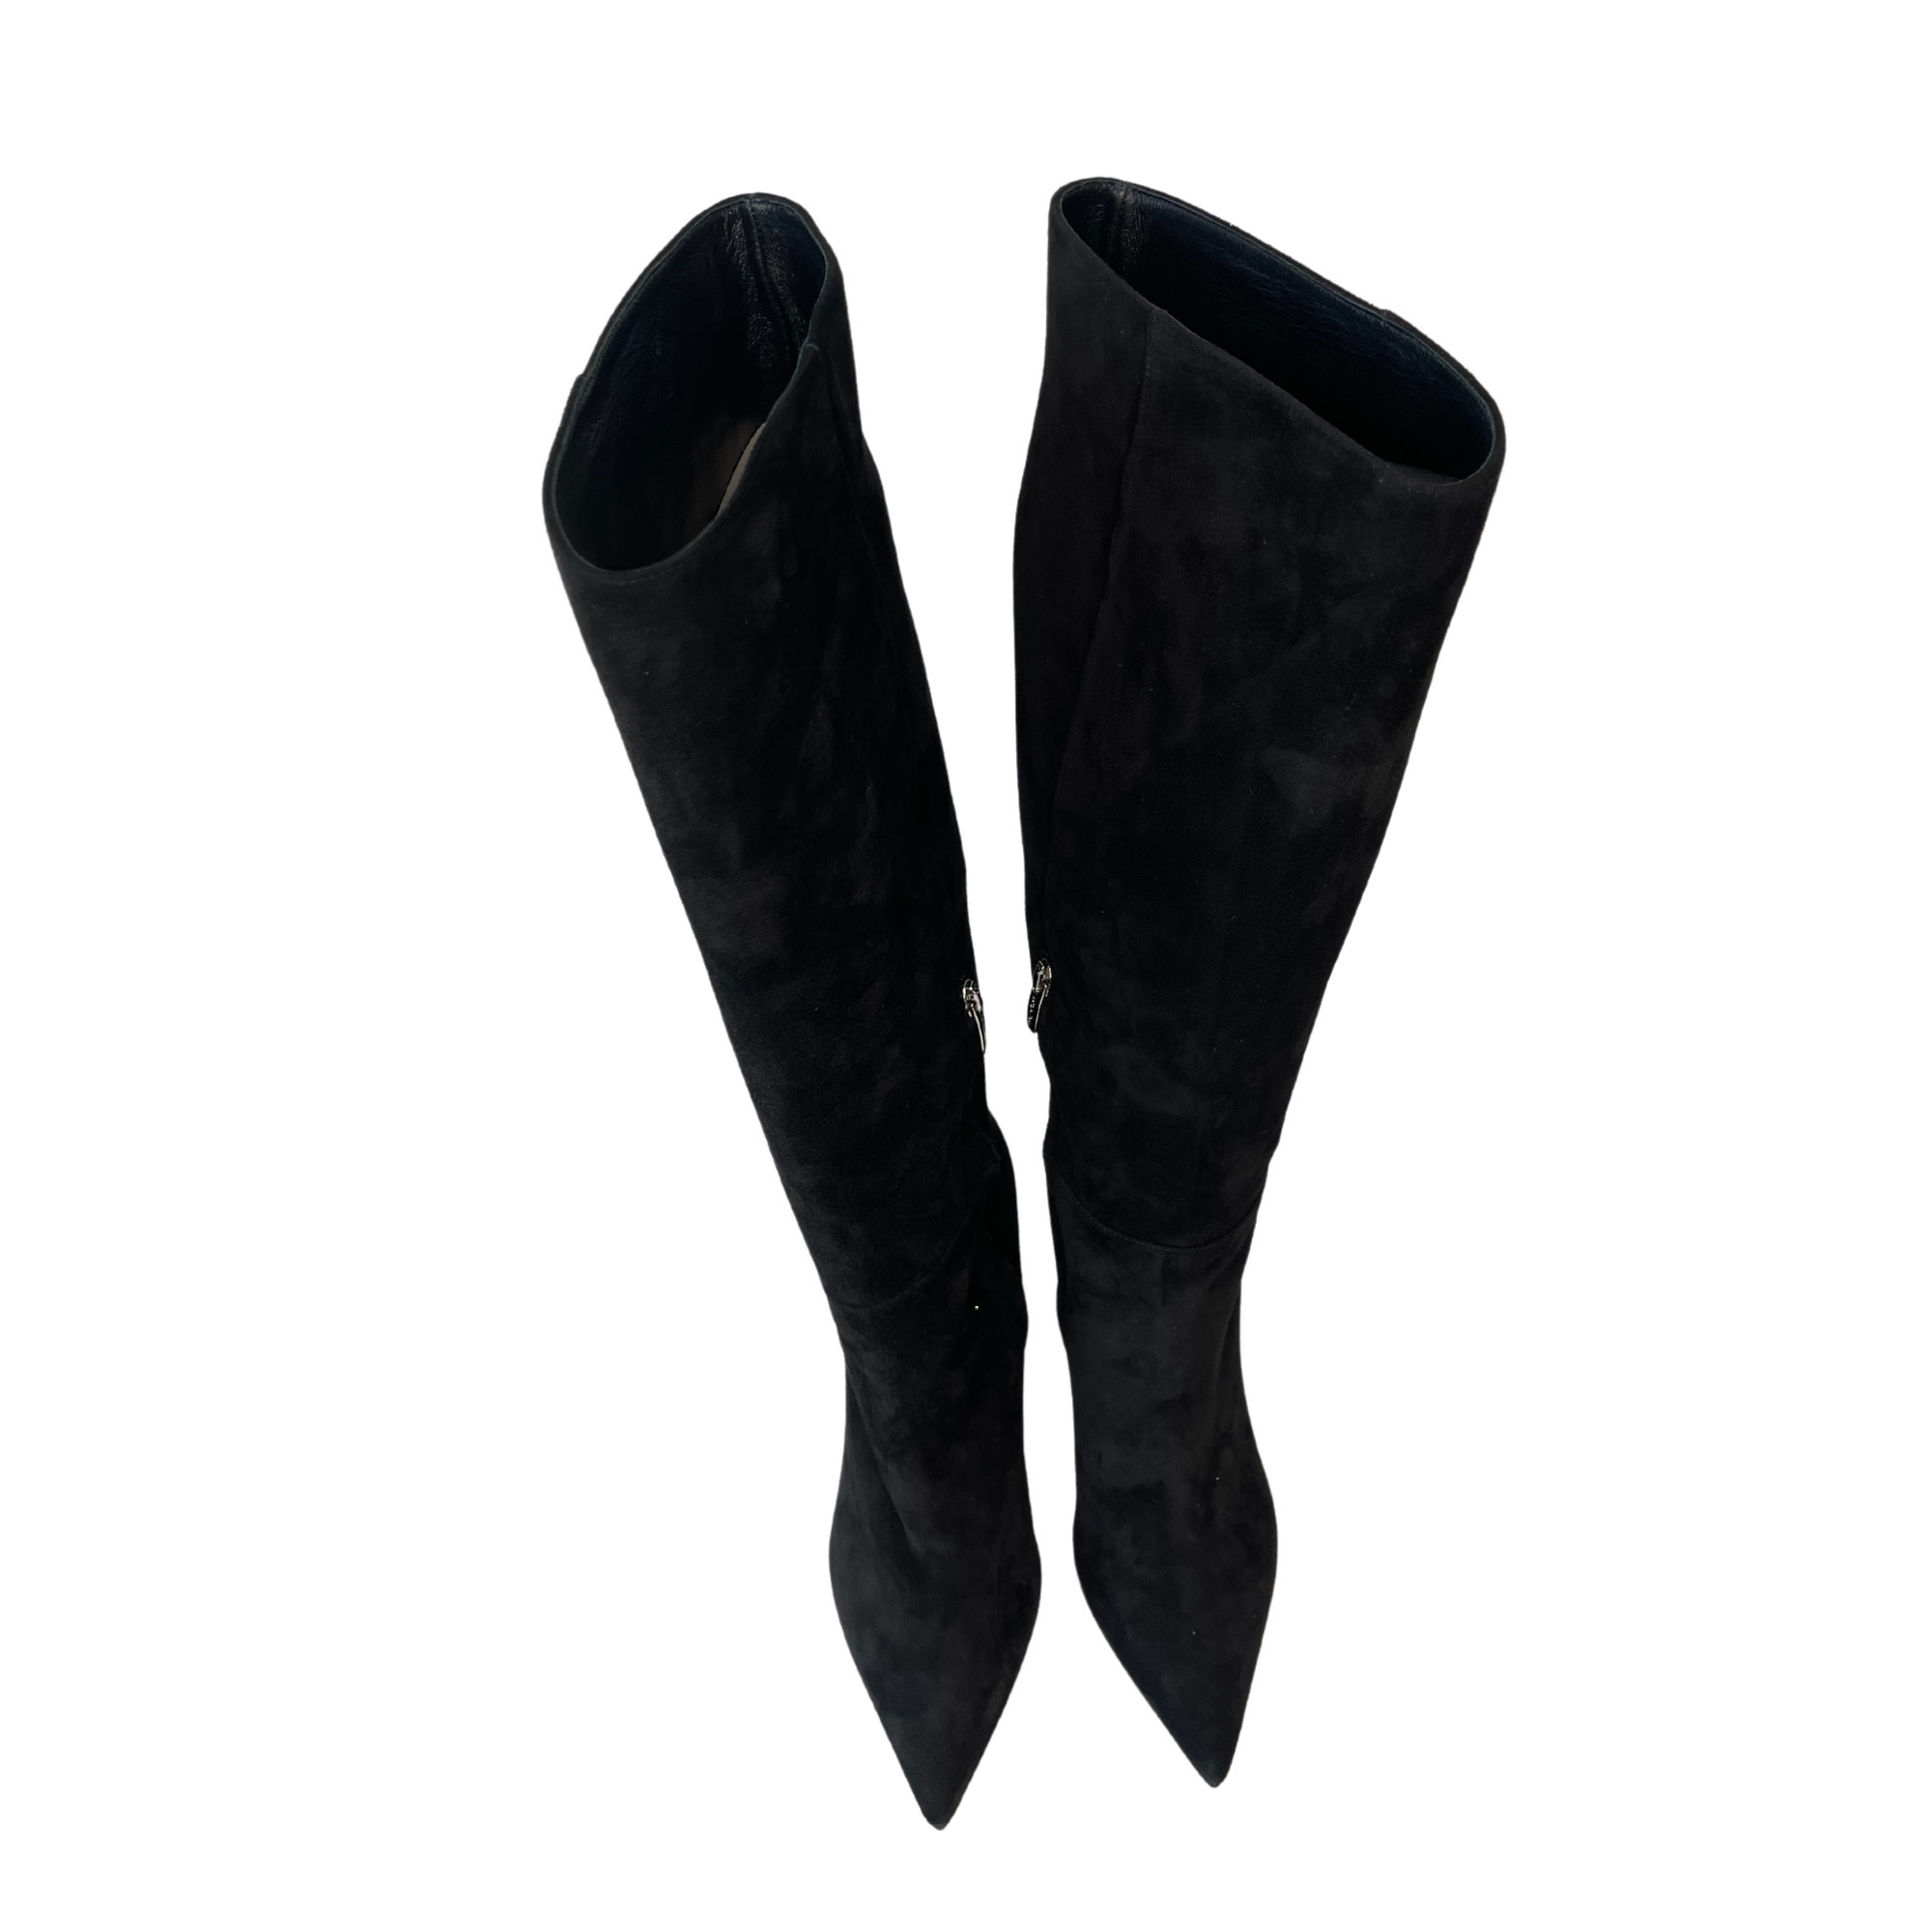 SERGIO ROSSI BLACK SUEDE OVER THE KNEE BOOTS (40 EU) - CRTBLNCHSHP